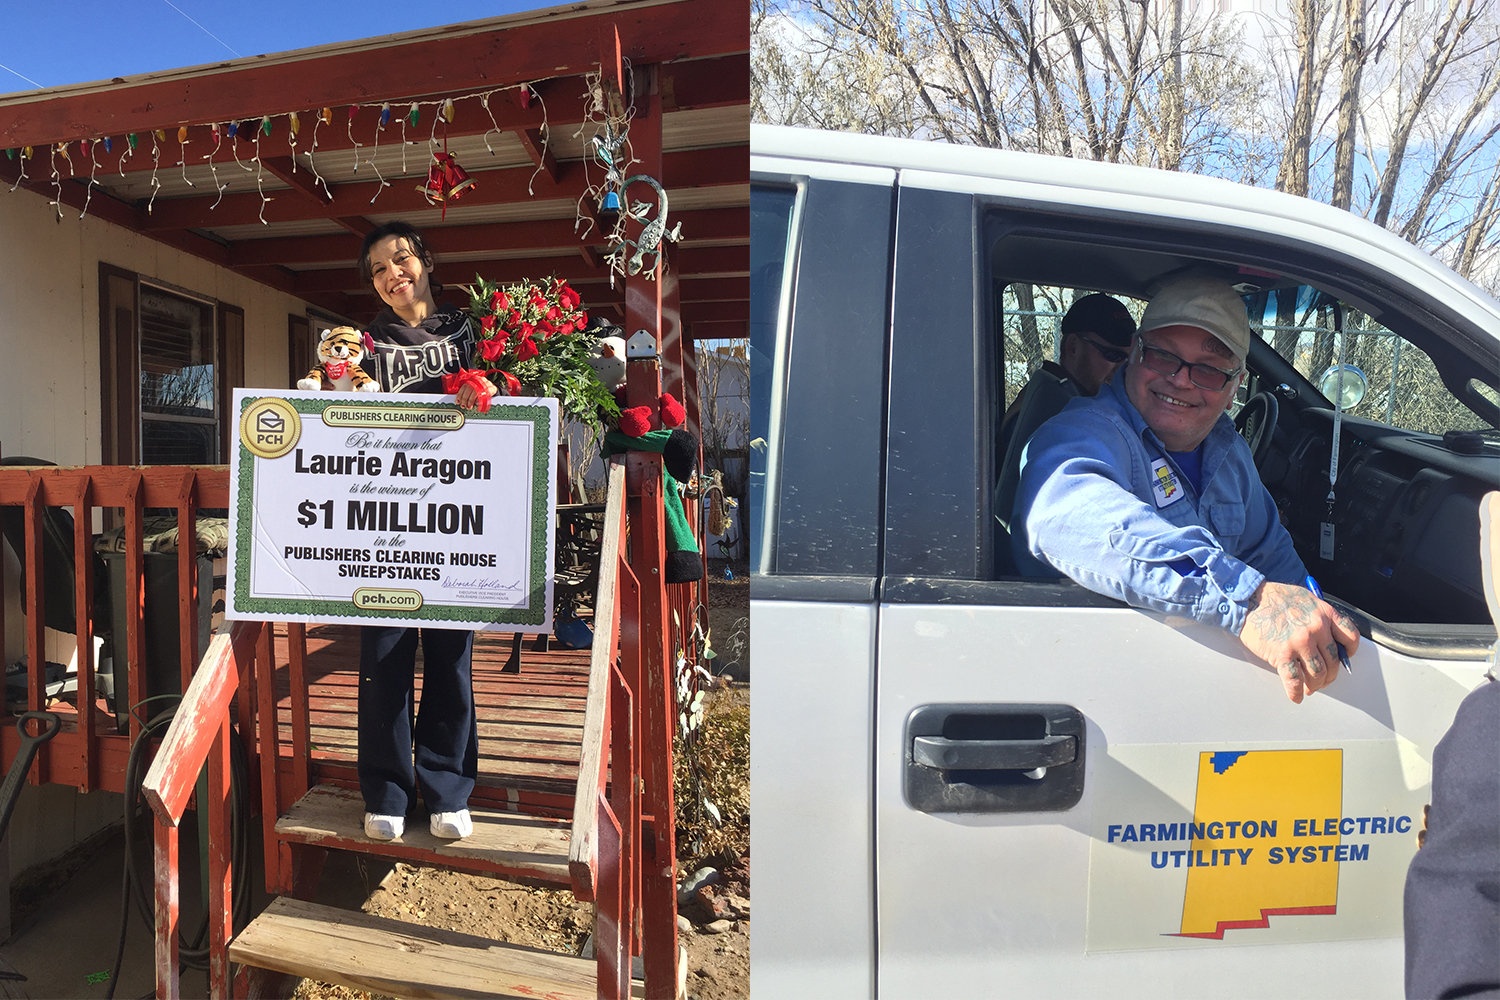 Laurie Aragon standing on the front porch of her mobile home in Farmington, New Mexico holding a check for $1 million from Publishers Clearing House. In the second photo, a worker from the local power authority smiles out the window of a truck.